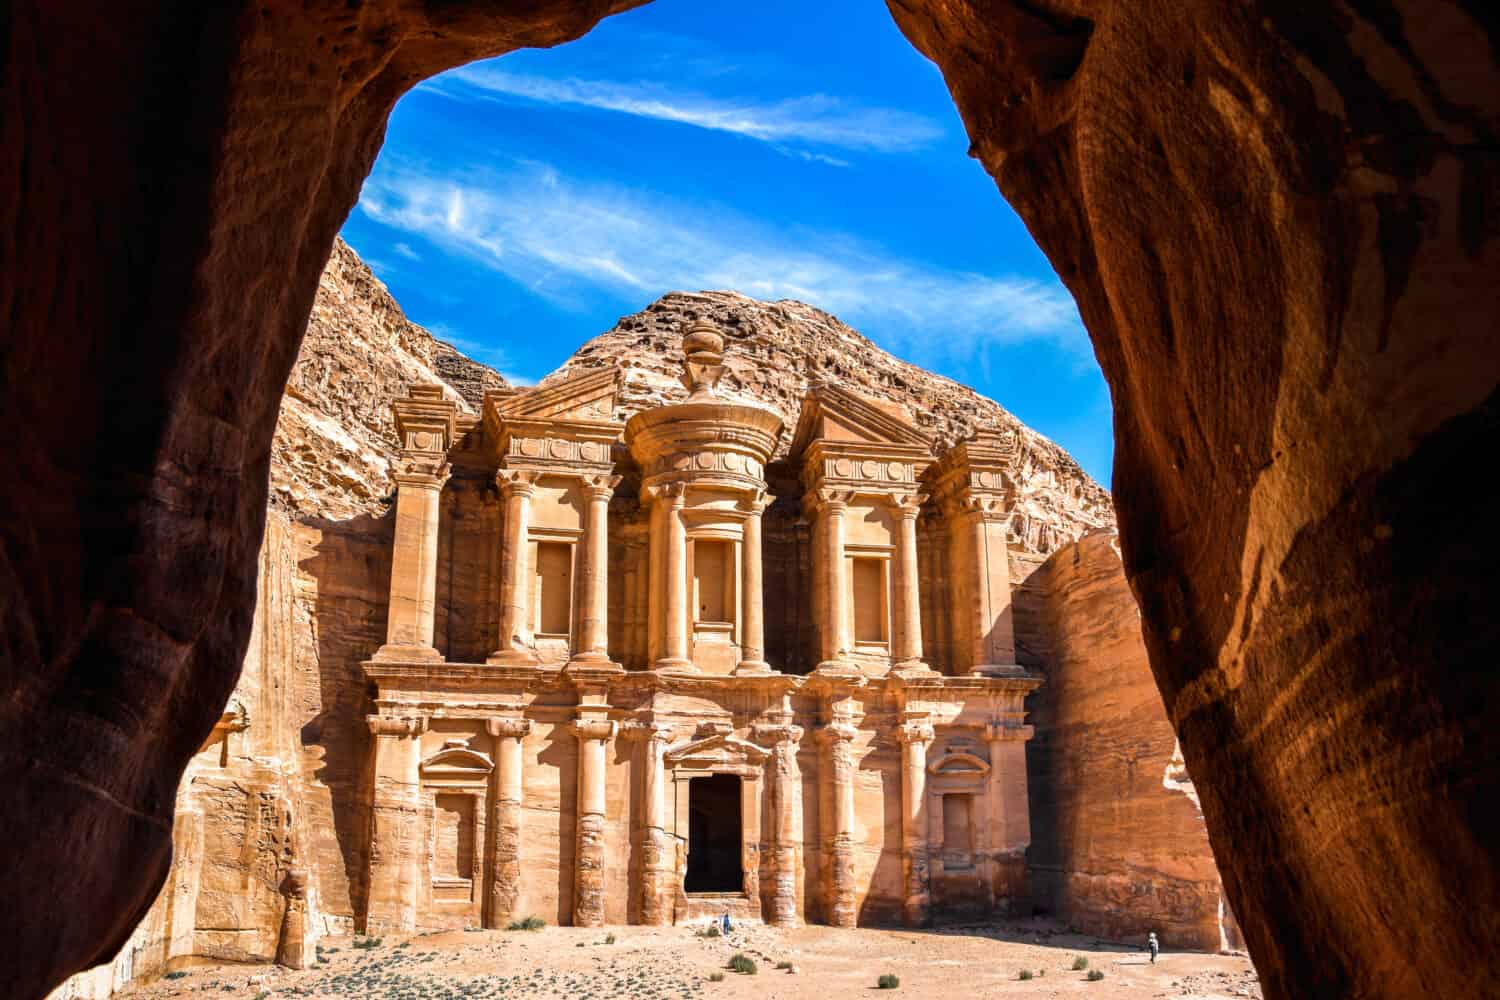 <p>Petra "The Rose City" is an ancient city in southern <a href="https://a-z-animals.com/animals/location/asia/jordan/?utm_campaign=msn&utm_source=msn_slideshow&utm_content=1325965&utm_medium=in_content">Jordan</a>, located 150 miles south of Bethlehem. Most people recognize it for the rose-colored rock cutouts, but this ancient city metropolis was once the center of an Arab kingdom in the 4th century B.C. It's half constructed and half cut out of rock.</p>    <p>Petra is threatened by floods and war damage, but it's still an incredible site visited by just under a million tourists each year.</p><p>Sharks, lions, alligators, and more! Don’t miss today’s latest and most exciting animal news. <strong><a href="https://www.msn.com/en-us/channel/source/AZ%20Animals%20US/sr-vid-7etr9q8xun6k6508c3nufaum0de3dqktiq6h27ddeagnfug30wka">Click here to access the A-Z Animals profile page</a> and be sure to hit the <em>Follow</em> button here or at the top of this article!</strong></p> <p>Have feedback? Add a comment below!</p>